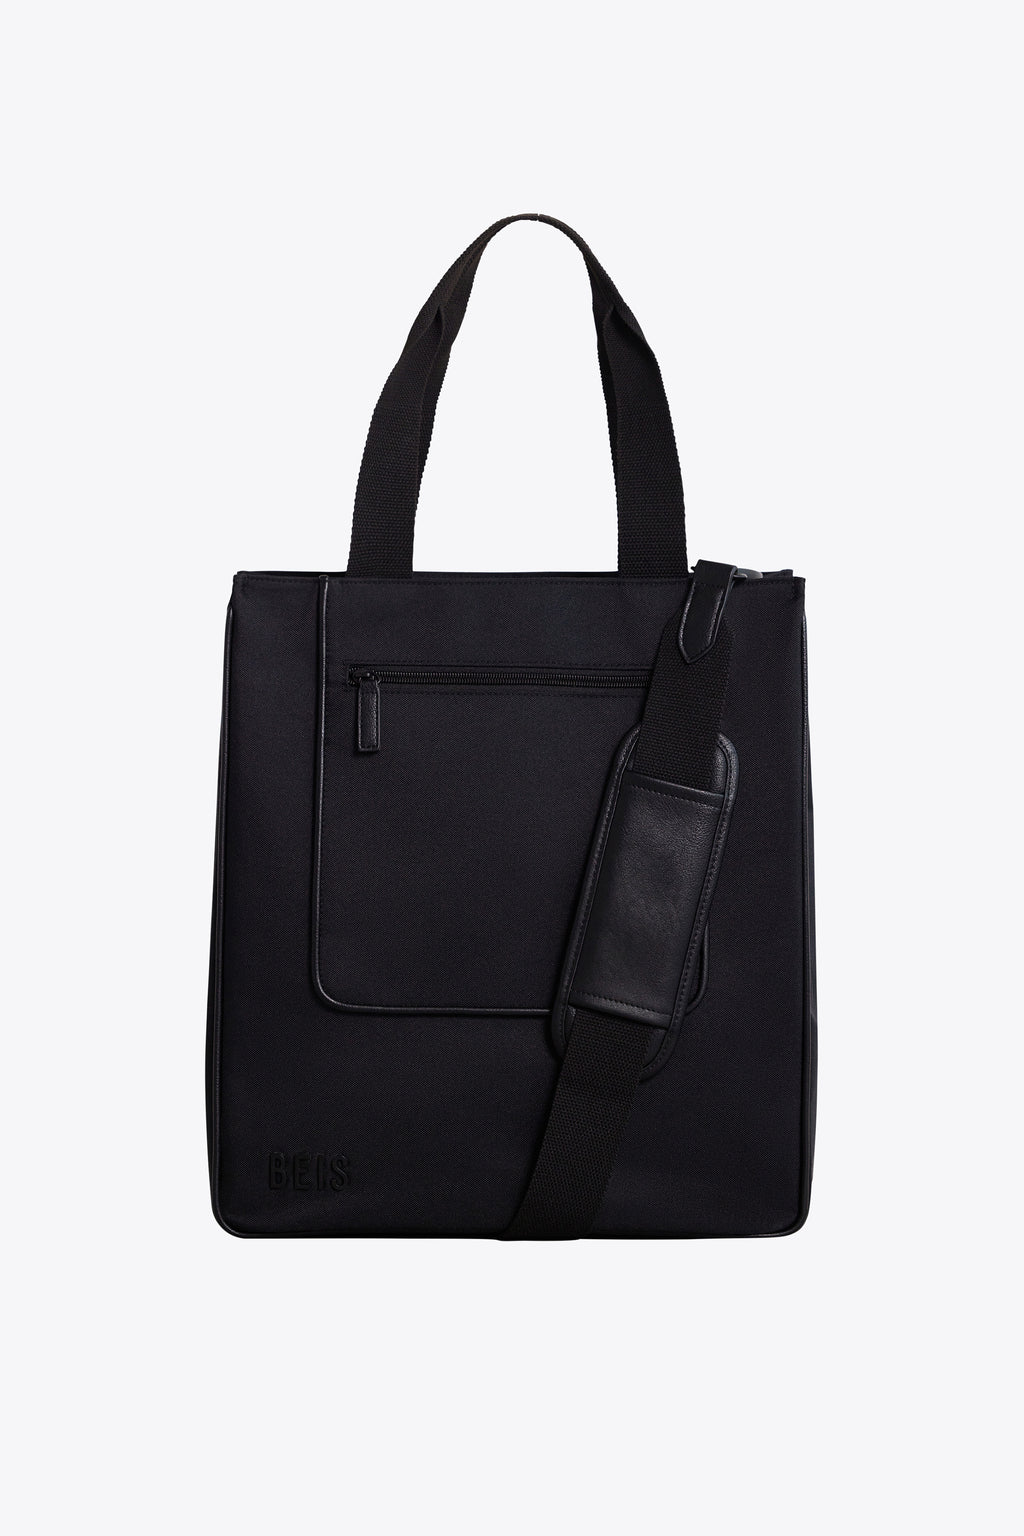 Béis 'The North To South Tote' in Black - Mens Work Tote Made From ...